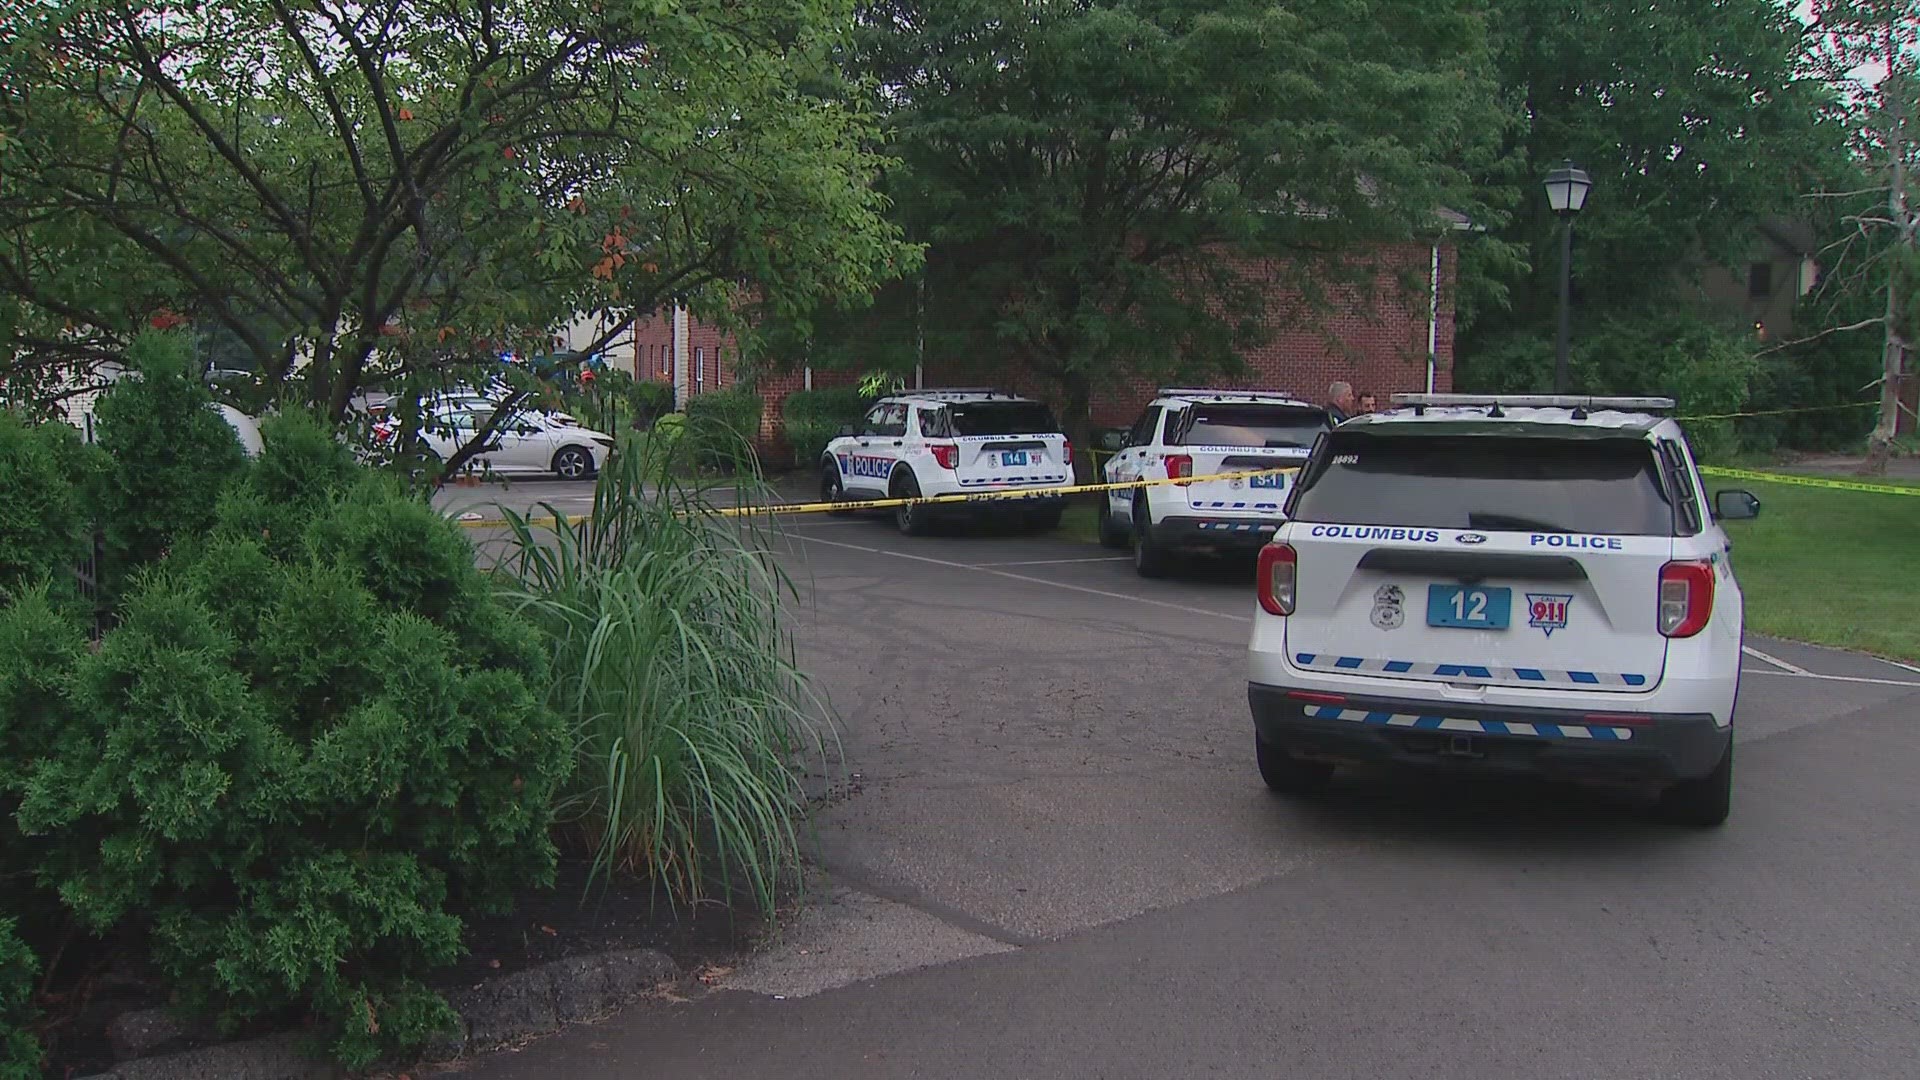 Police say the victim was shot just after 7:30 p.m. Monday.